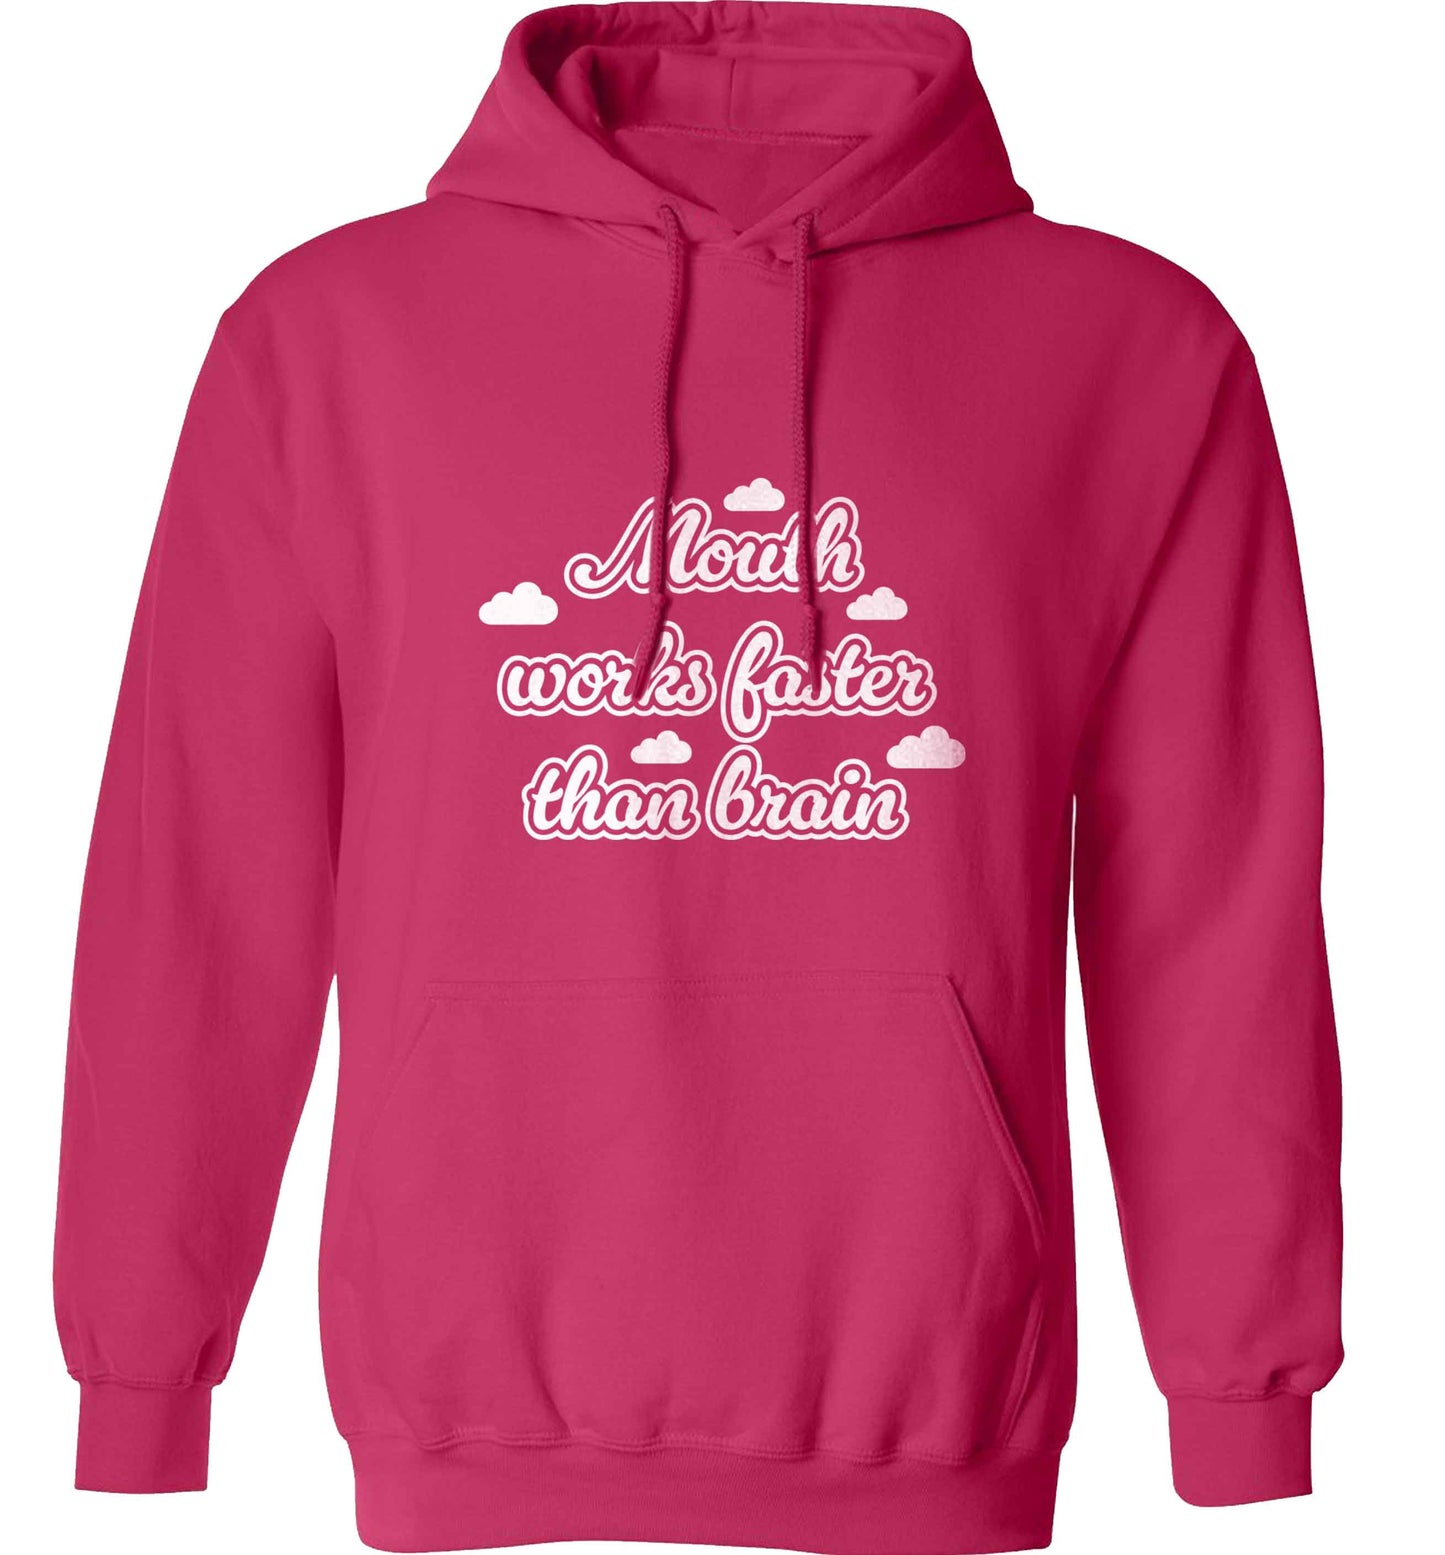 Mouth works faster than brain adults unisex pink hoodie 2XL